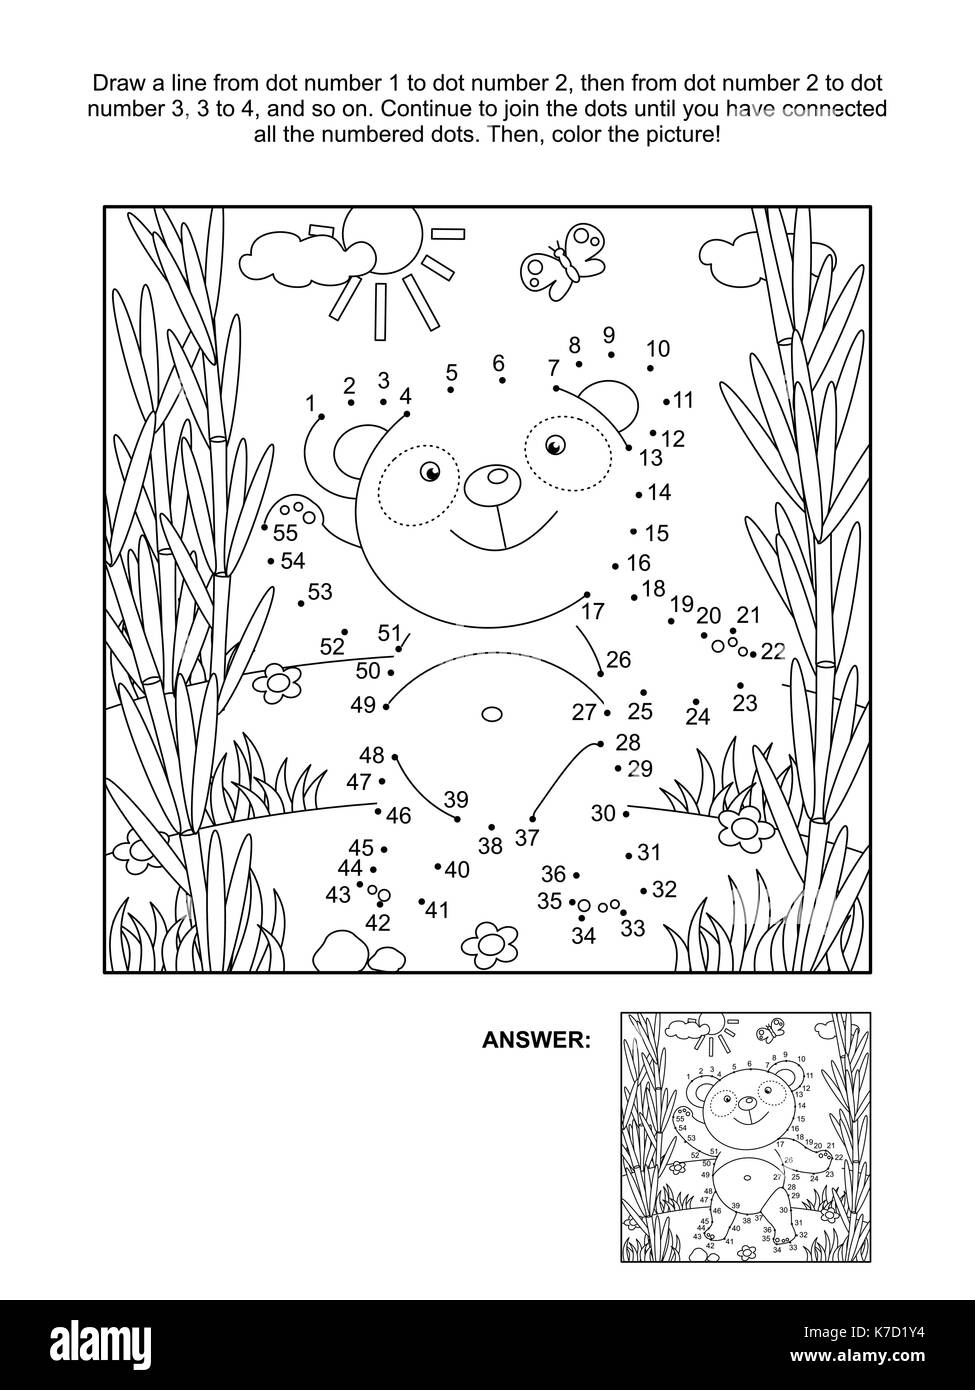 Panda bear in bamboo forest connect the dots picture puzzle and coloring page. Answer included. Stock Vector